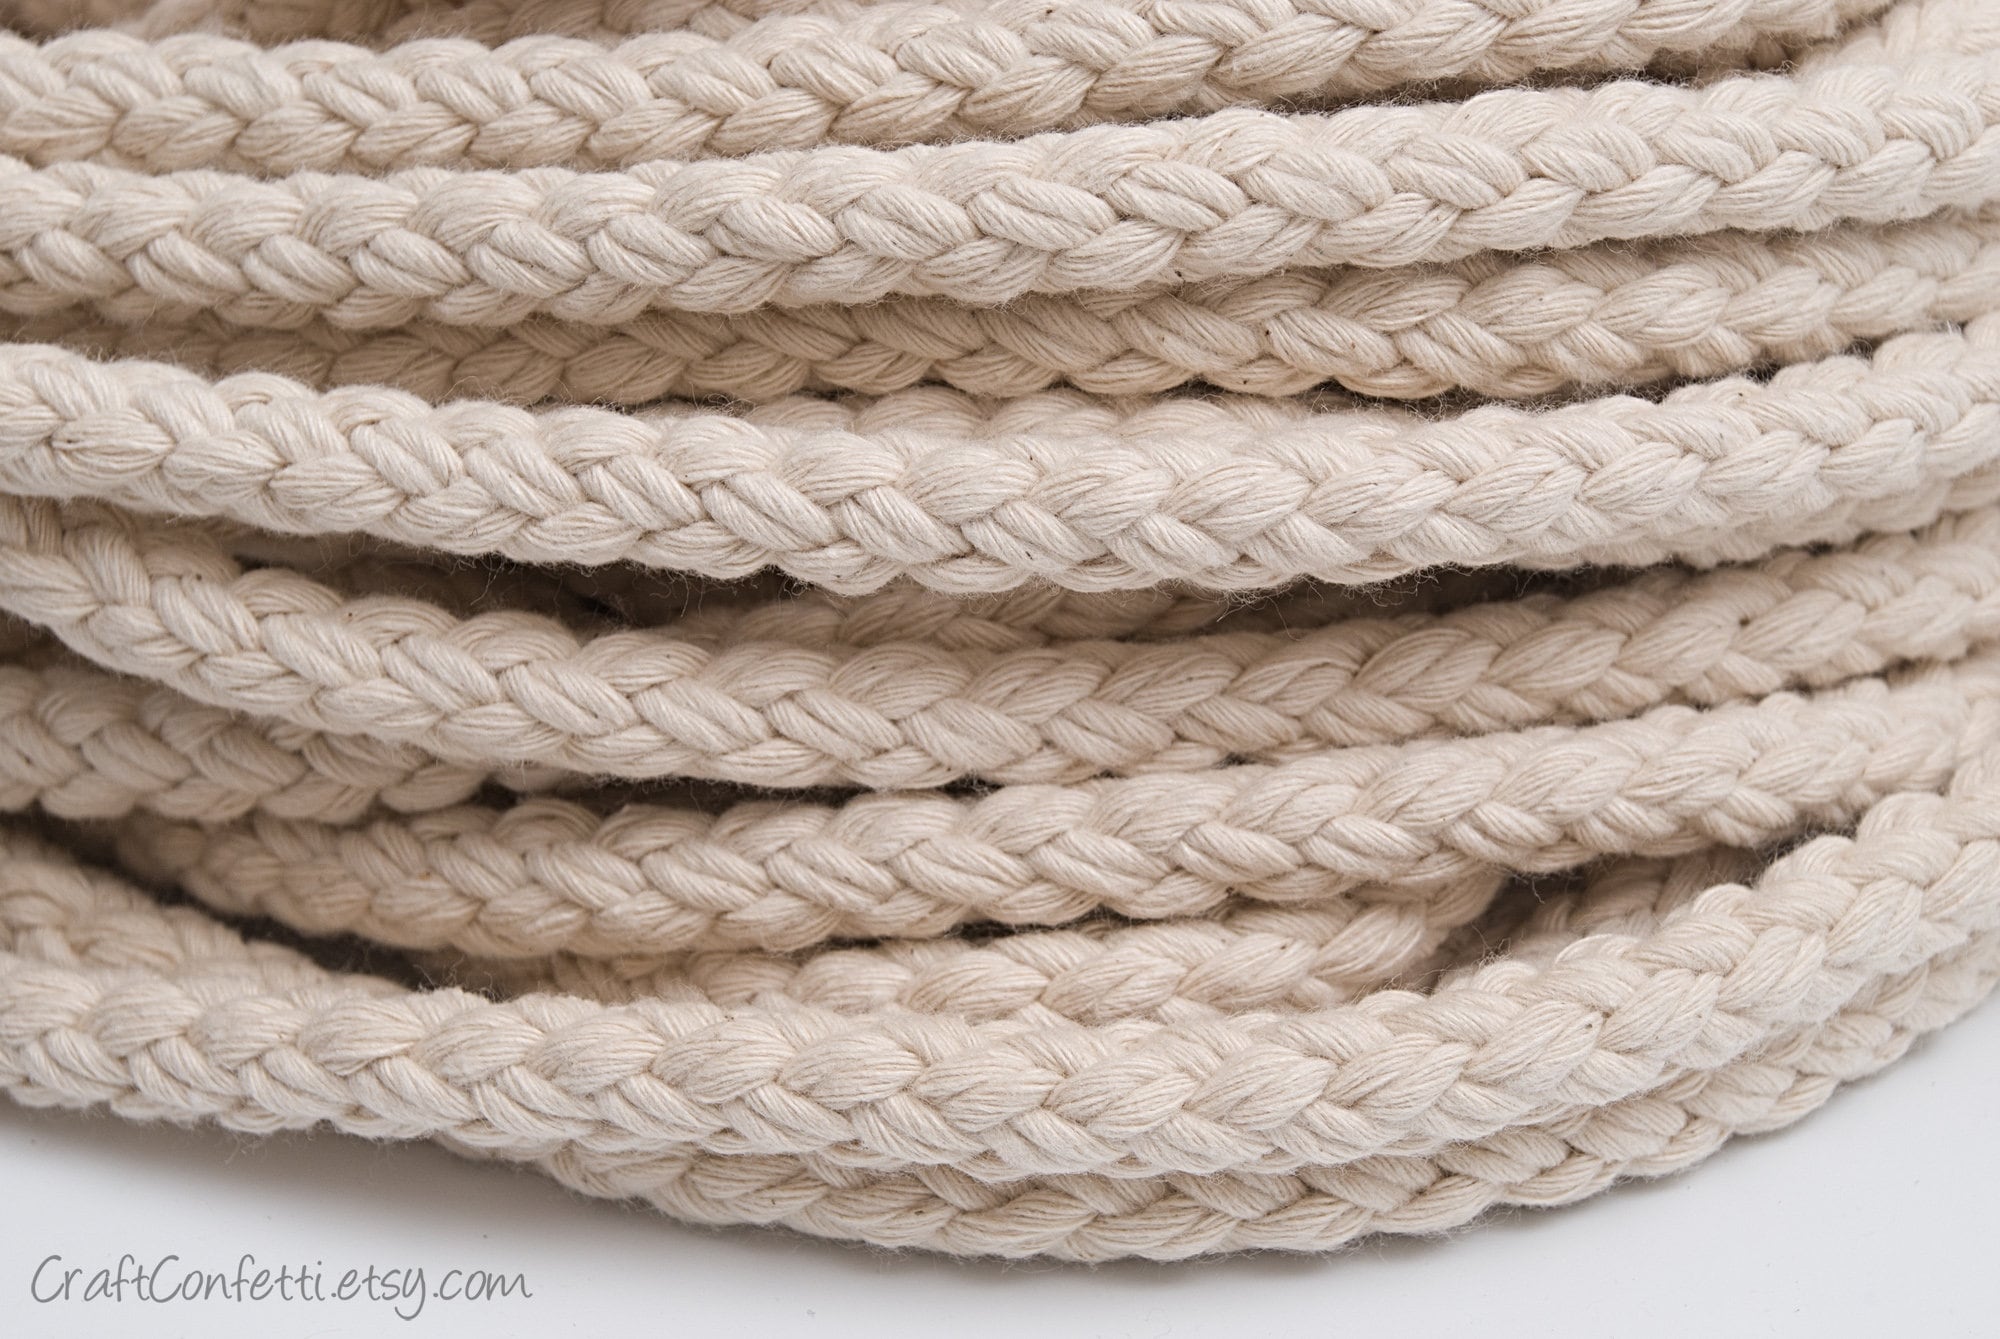 Thick Cotton Braided Rope 13mm, Natural Thick Rope, Handle for Bag, Natural  Color Cord, Interior Craft Supplies Decor / 15ft 5yd4.6m 